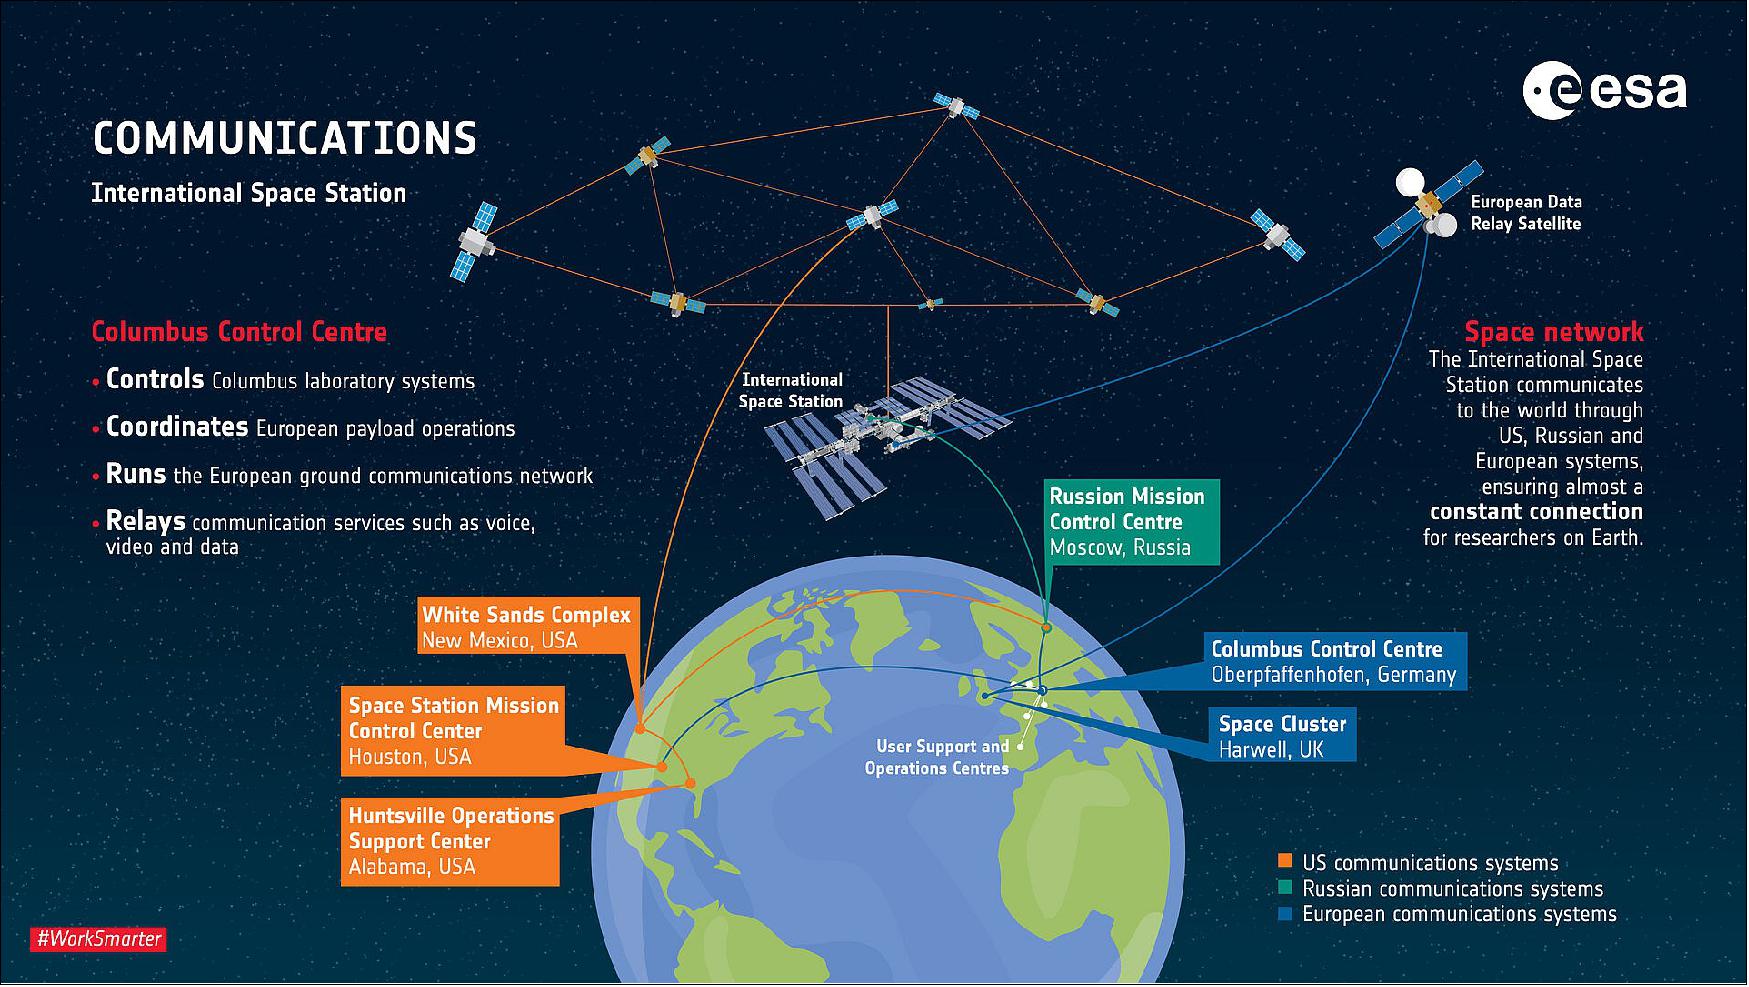 Figure 13: Infographic showing the systems used to communicate with the International Space Station and how data is relayed to ESA's Columbus Control Centre in Oberpfaffenhofen, Germany (image credit: ESA–K. Oldenburg)